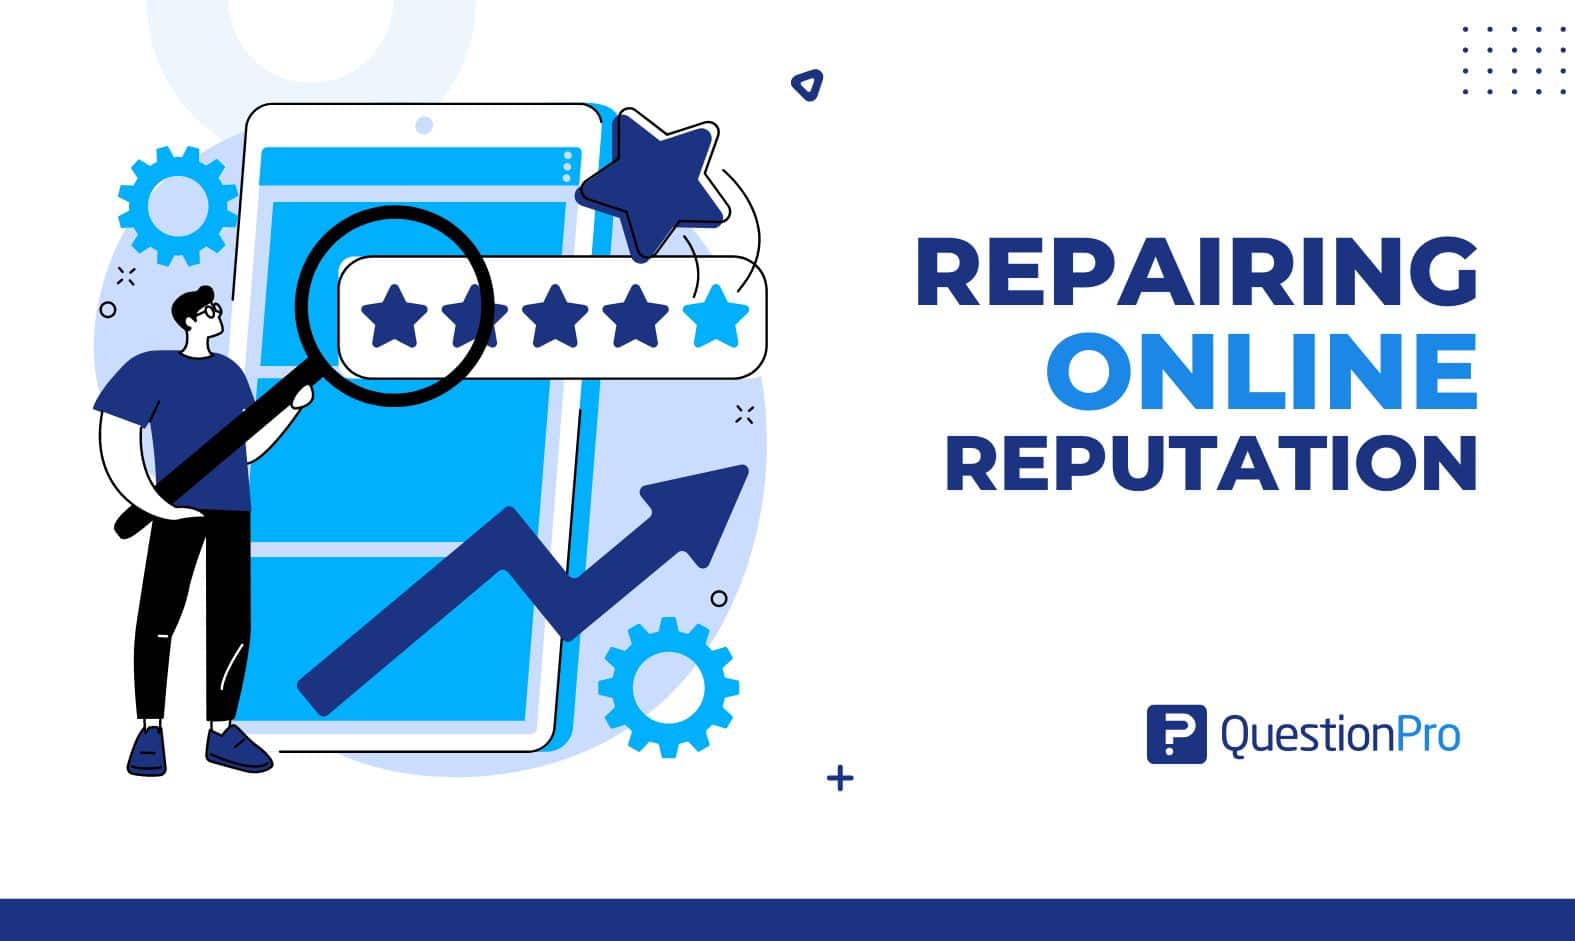 An online reputation is affected by unfavorable customer reviews. Use these eight simple ways for repairing online reputation and get going.